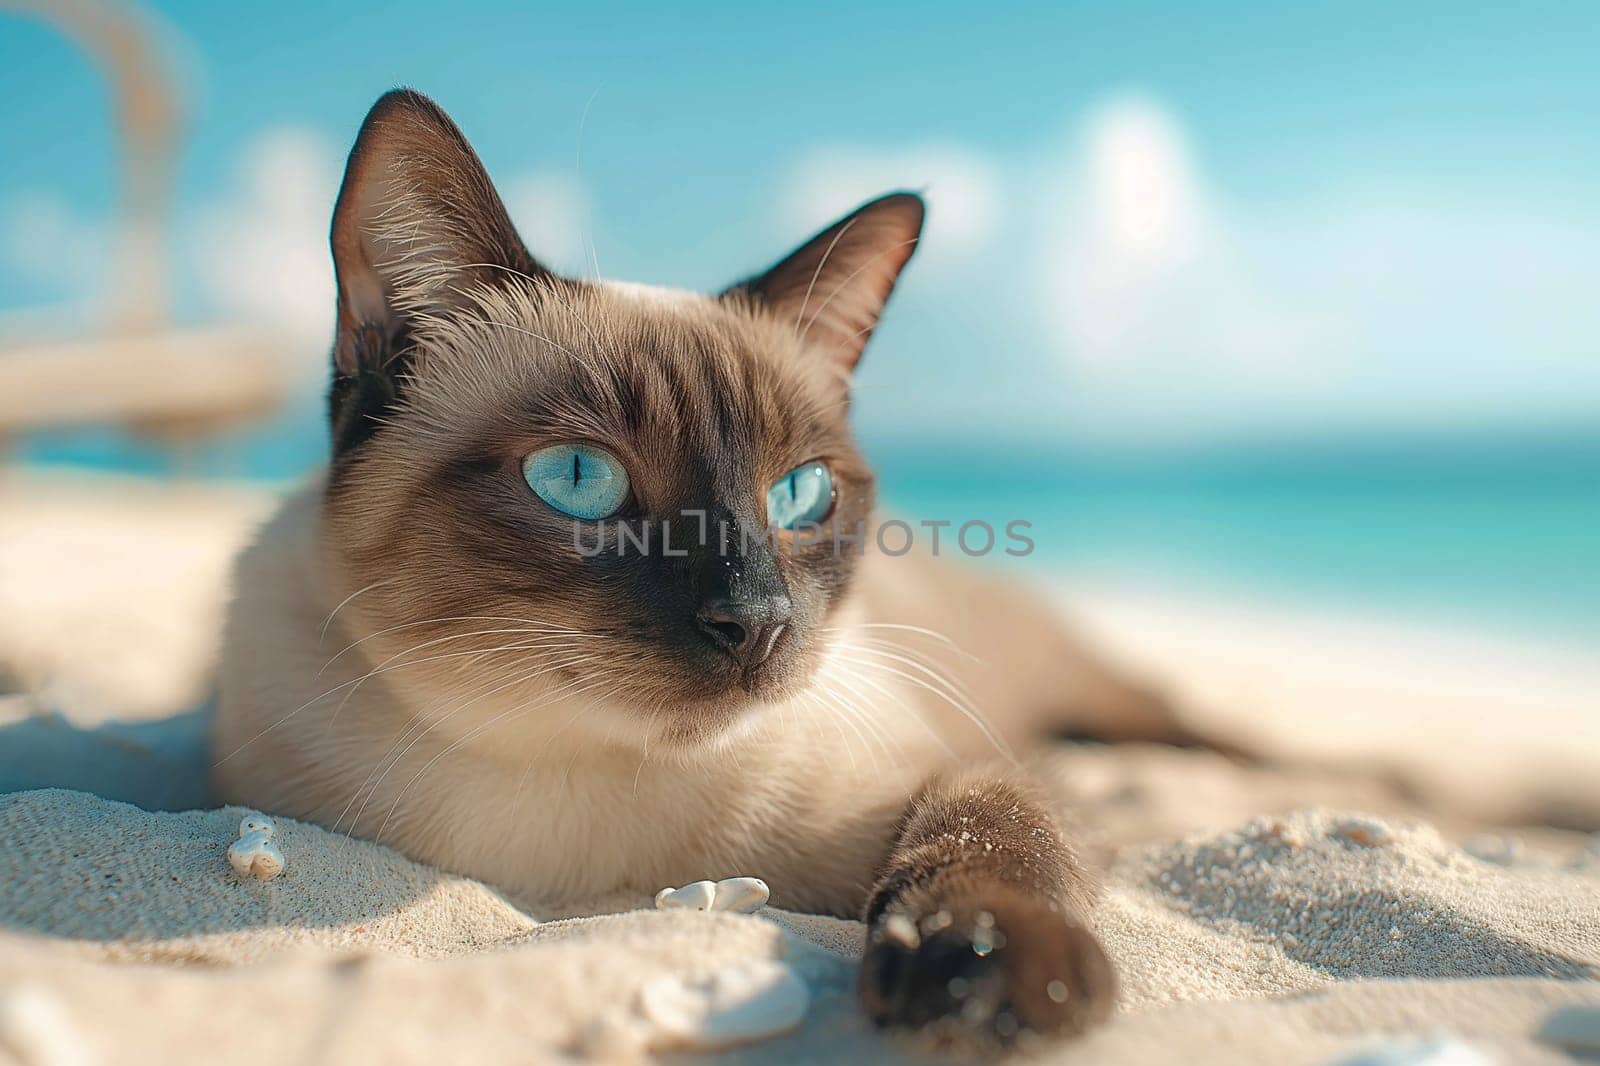 A serene calico cat relaxing on a sandy beach with a clear blue sky.